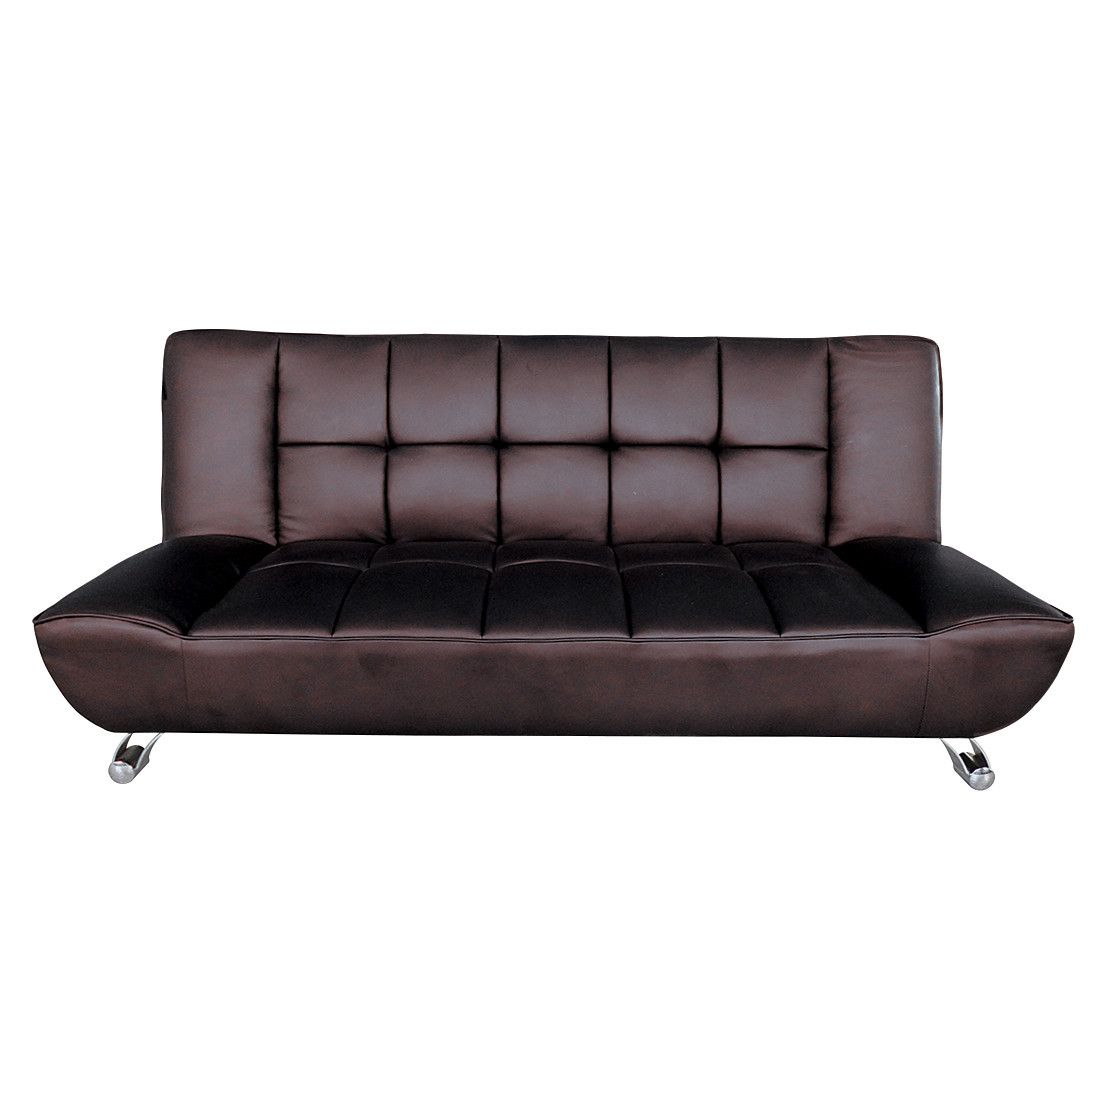 Vogue Sofa Bed Brown Faux Leather – Sofa Beds – Living Room Seating For Faux Leather Sofas In Dark Brown (Gallery 14 of 20)